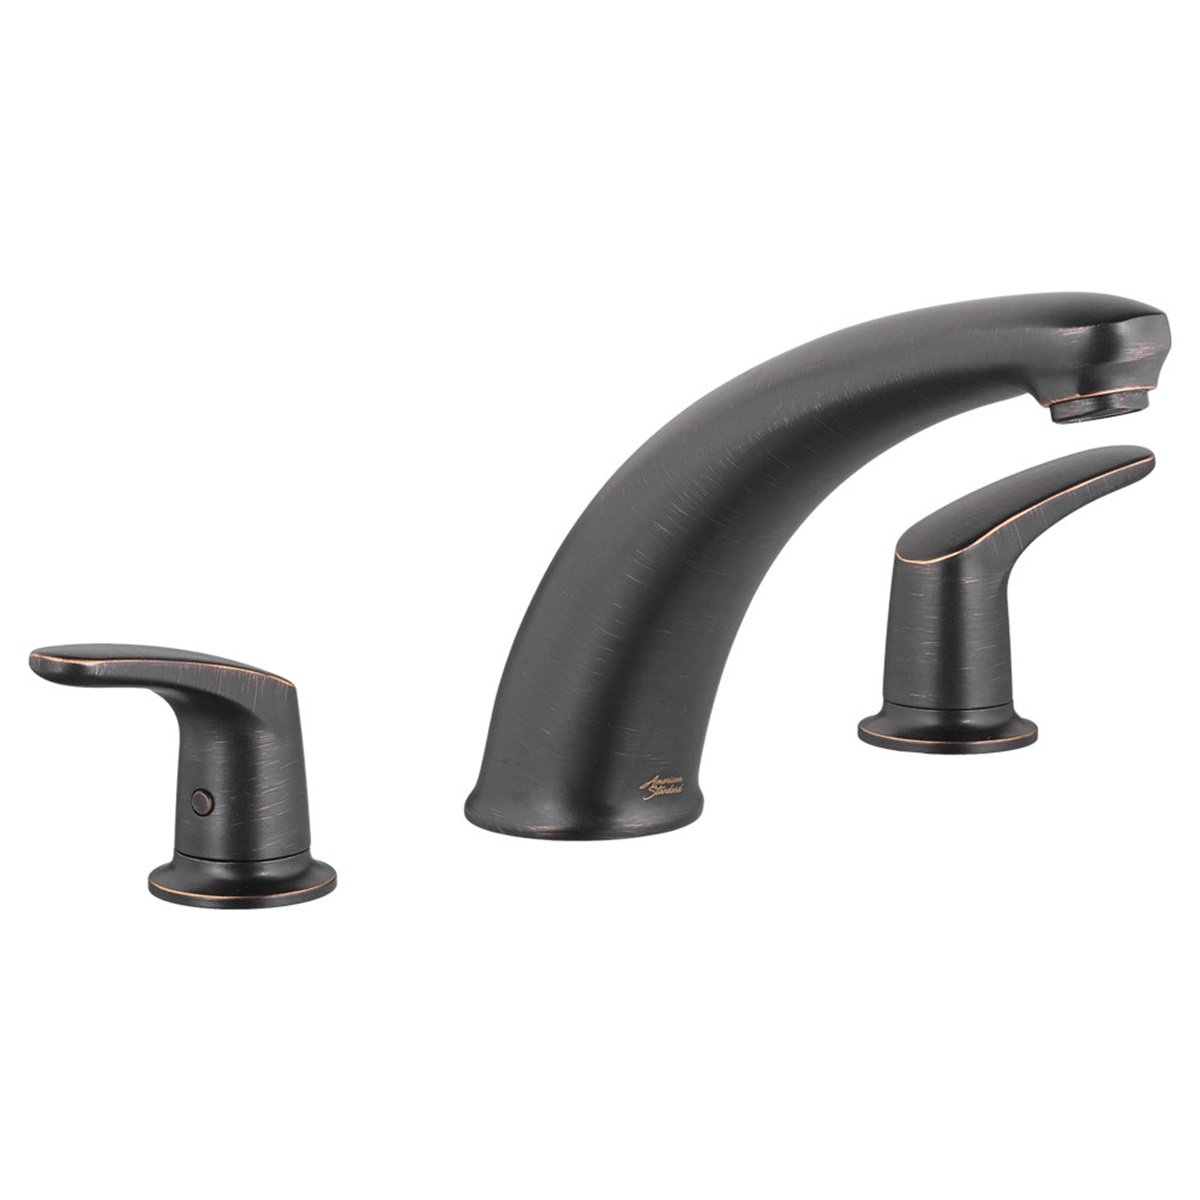 T075.900.278 COLONY PRO DECK MOUNT TUB FILLER LEGACY